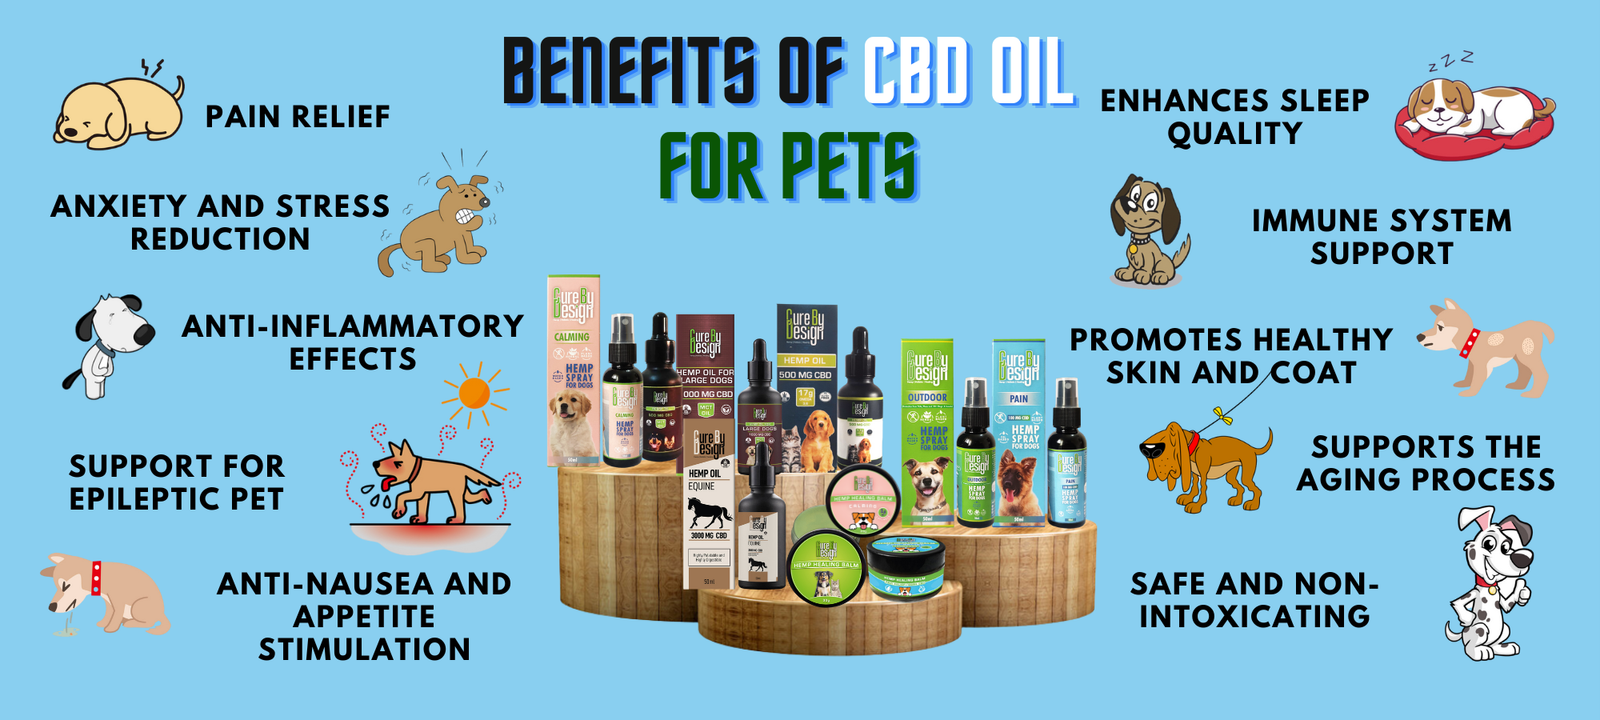 Cure By Design Benefits of CBD Oil for Pets